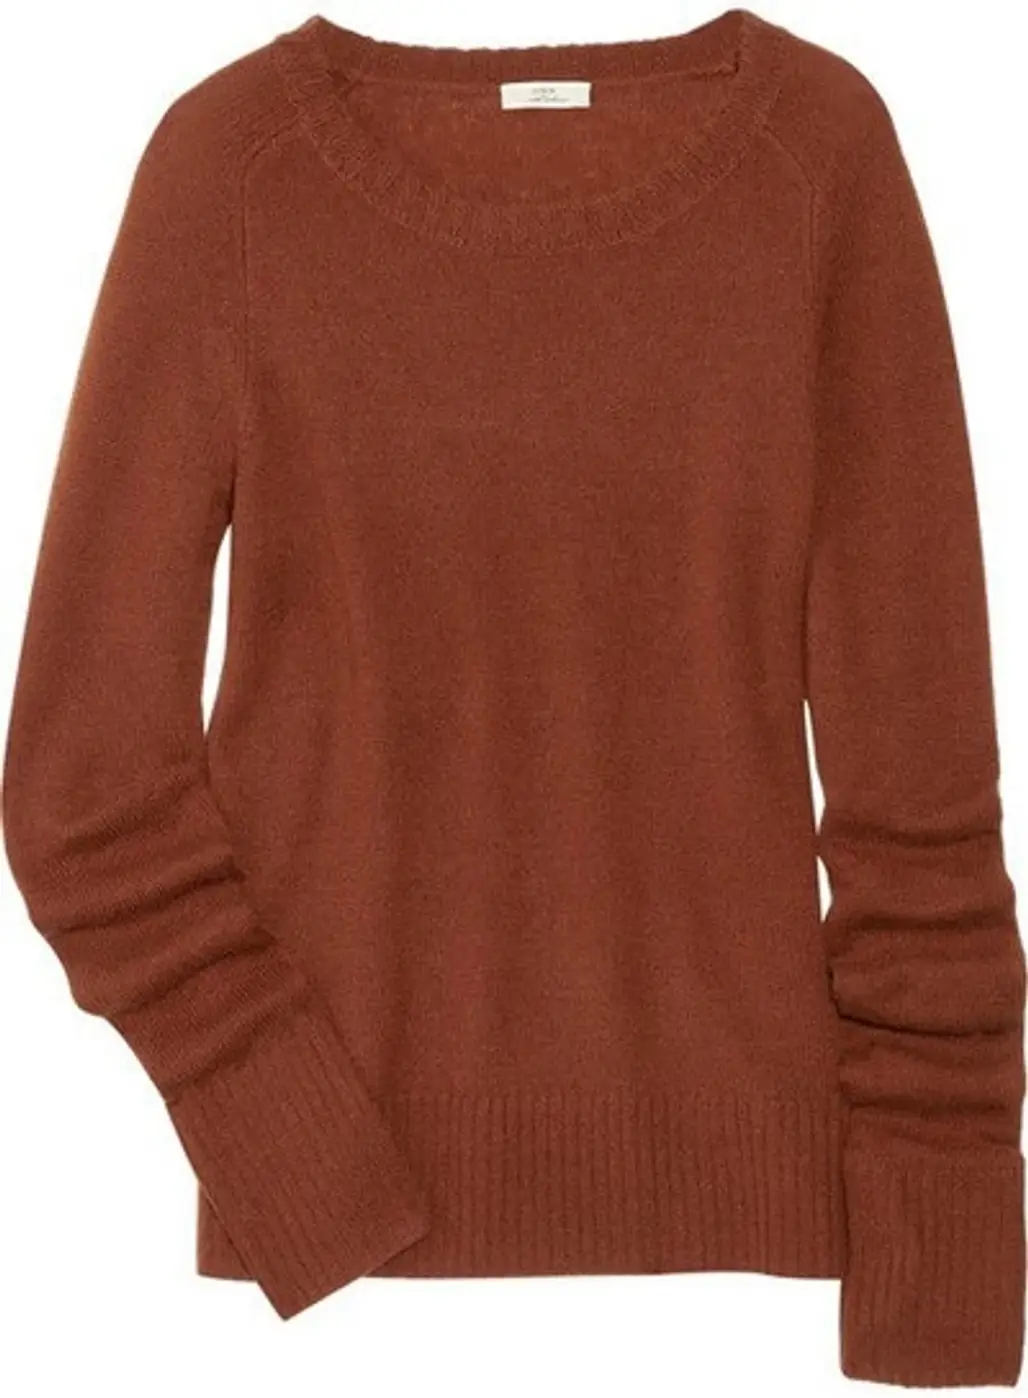 J.Crew Betsy Wool and Cashmere Blend Sweater